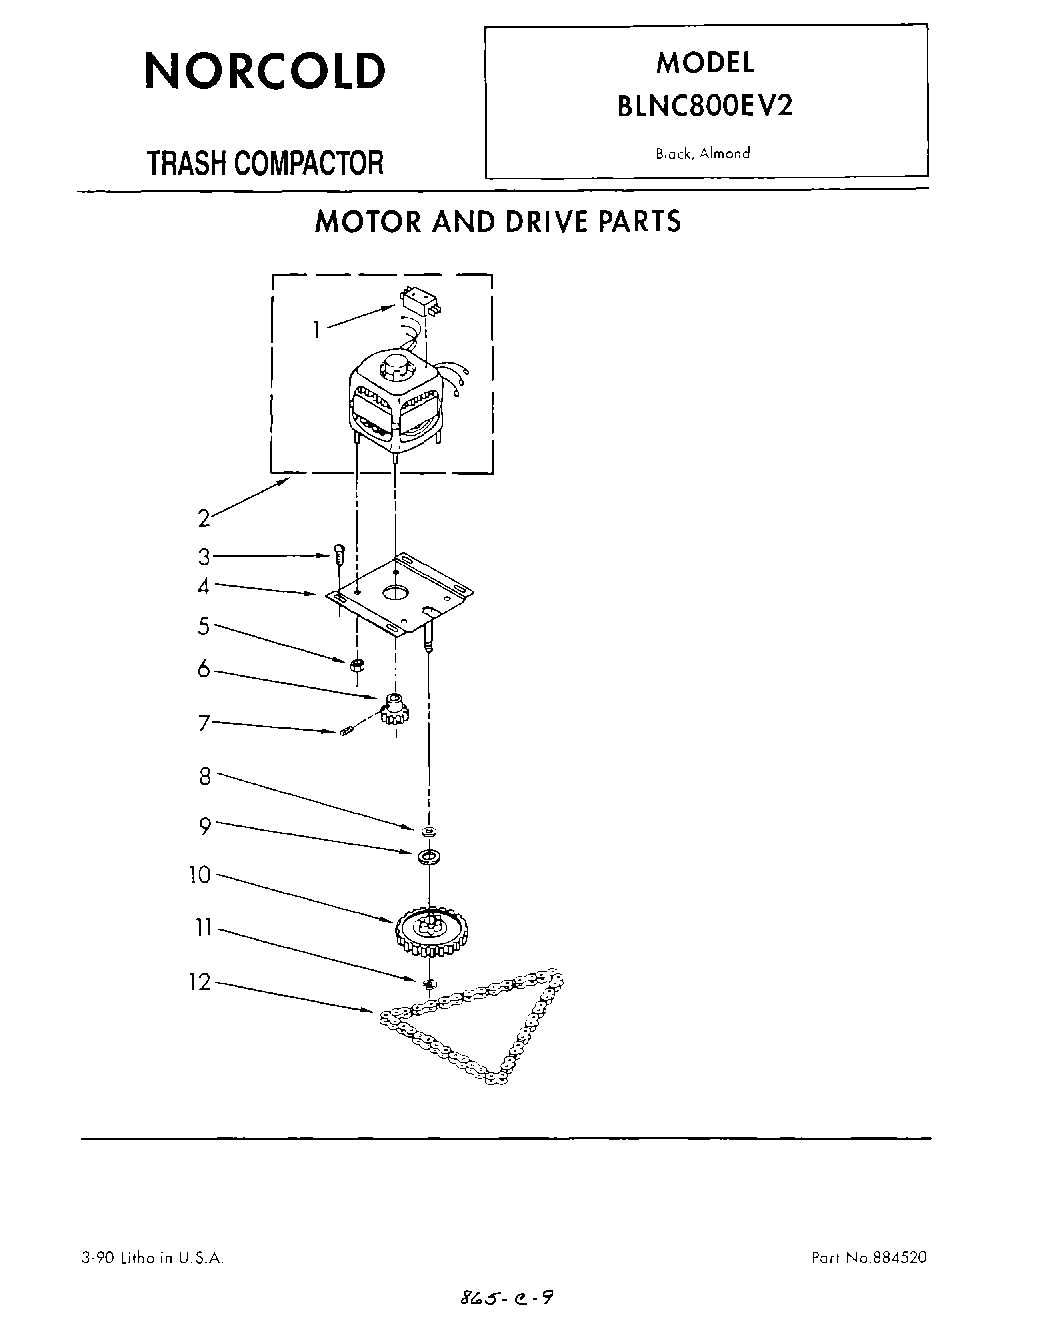 01 - MOTOR AND DRIVE PARTS, LITERATURE AND OPTIONAL